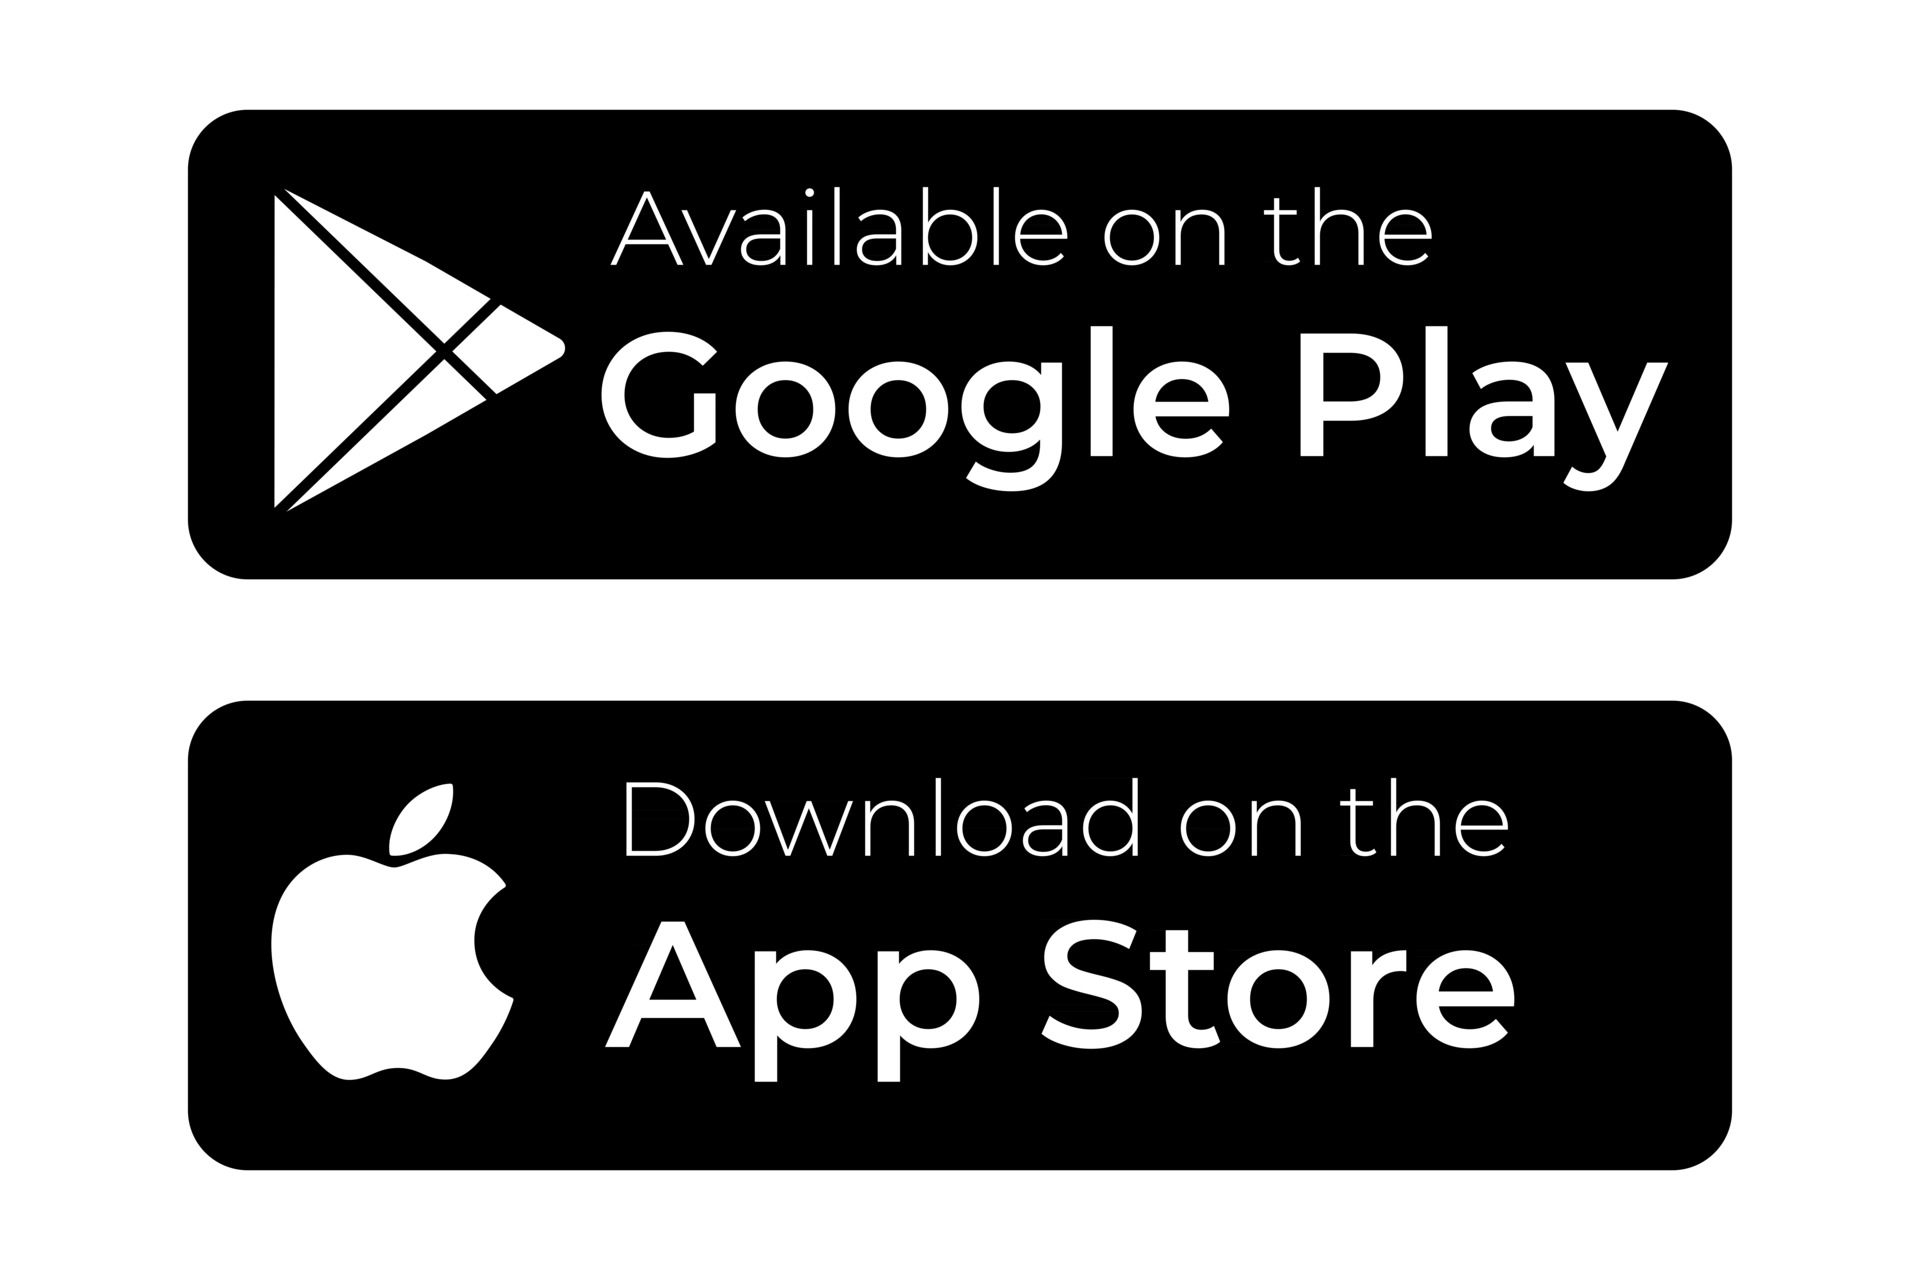 download-apps-button-google-play-and-app-store-vector